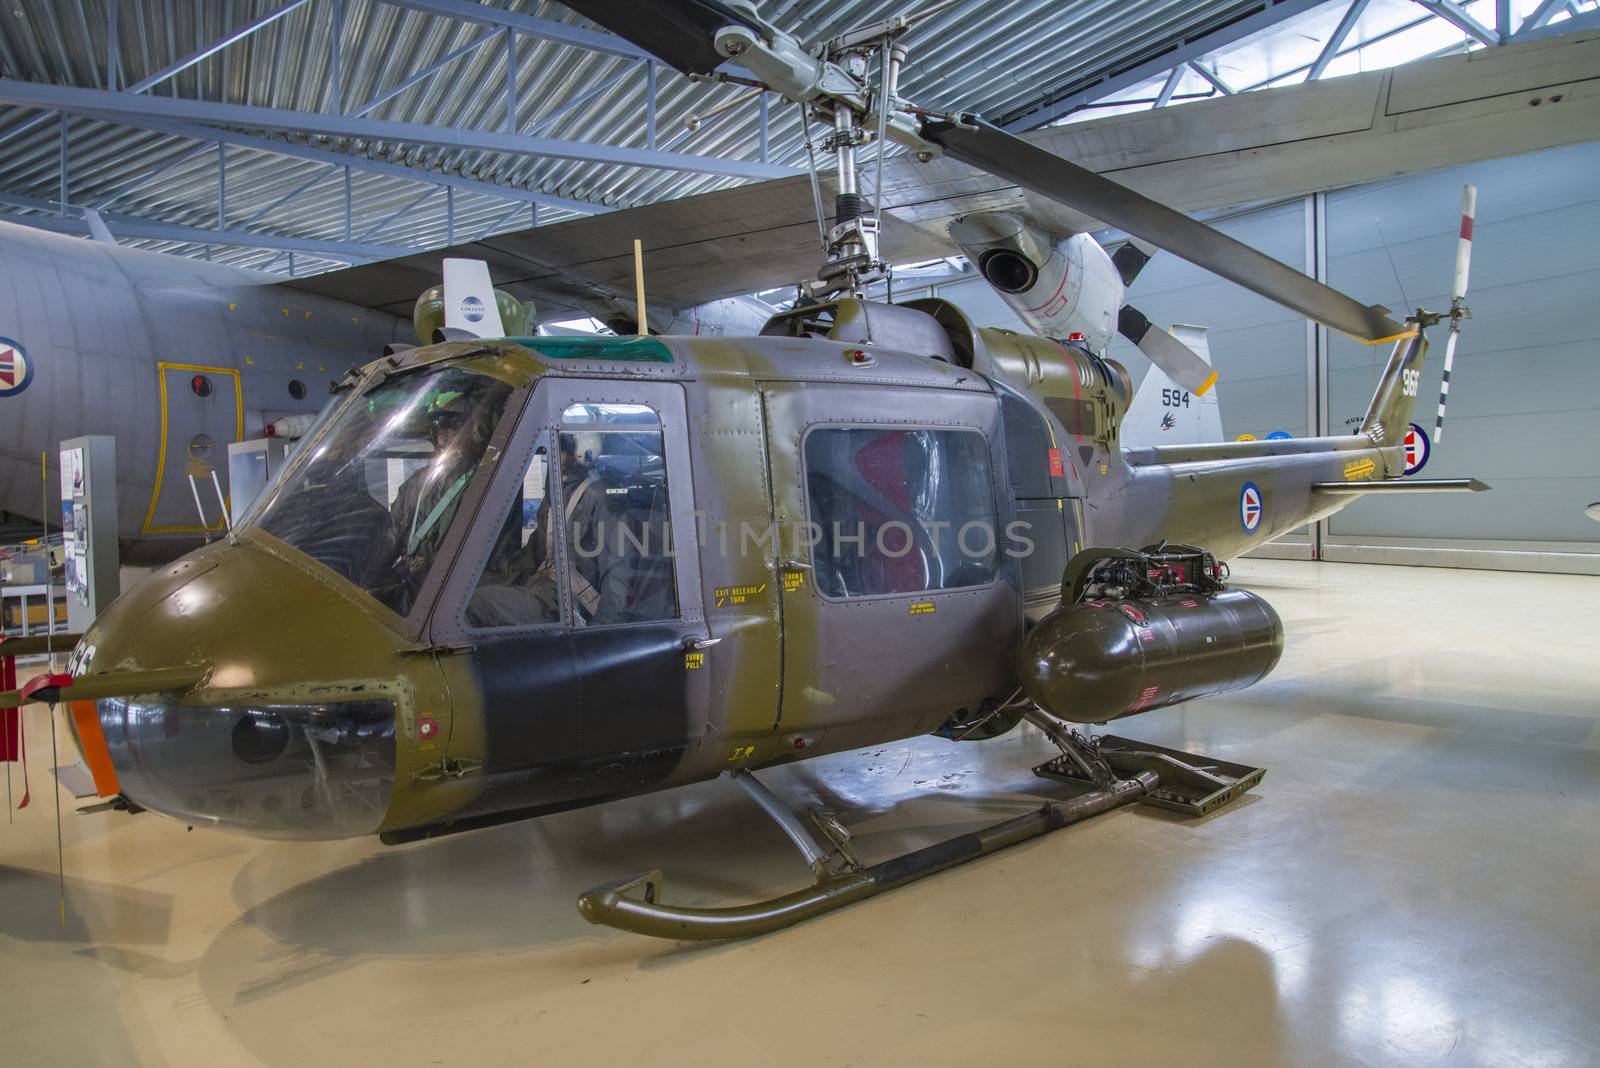 bell uh-1b huey is a military helicopter powered by a single, turboshaft engine, with a two-bladed main rotor and tail rotor, manufactured by bell helicopter textron, the pictures are shot in march 2013 by norwegian armed forces aircraft collection which is a military aviation museum located at gardermoen, north of oslo, norway.